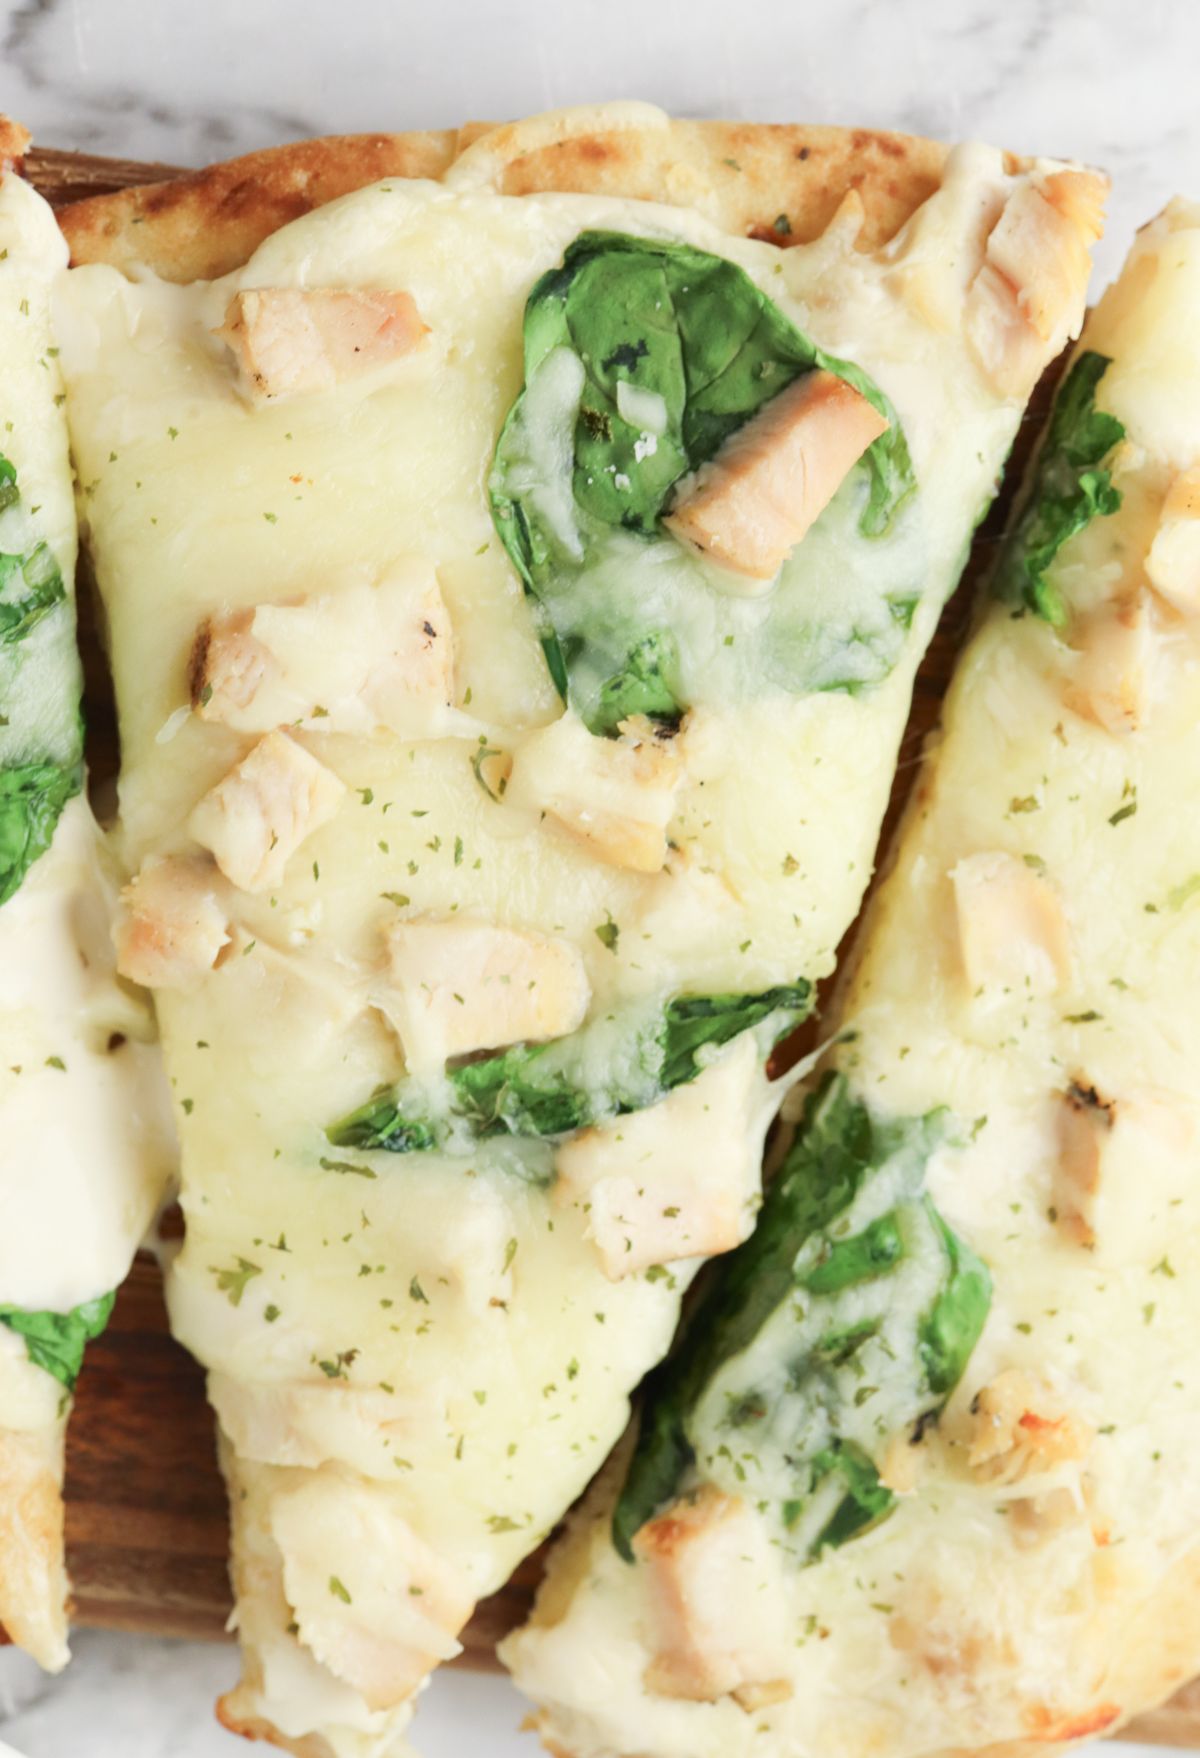 Chicken and spinach pizza on a wooden cutting board.